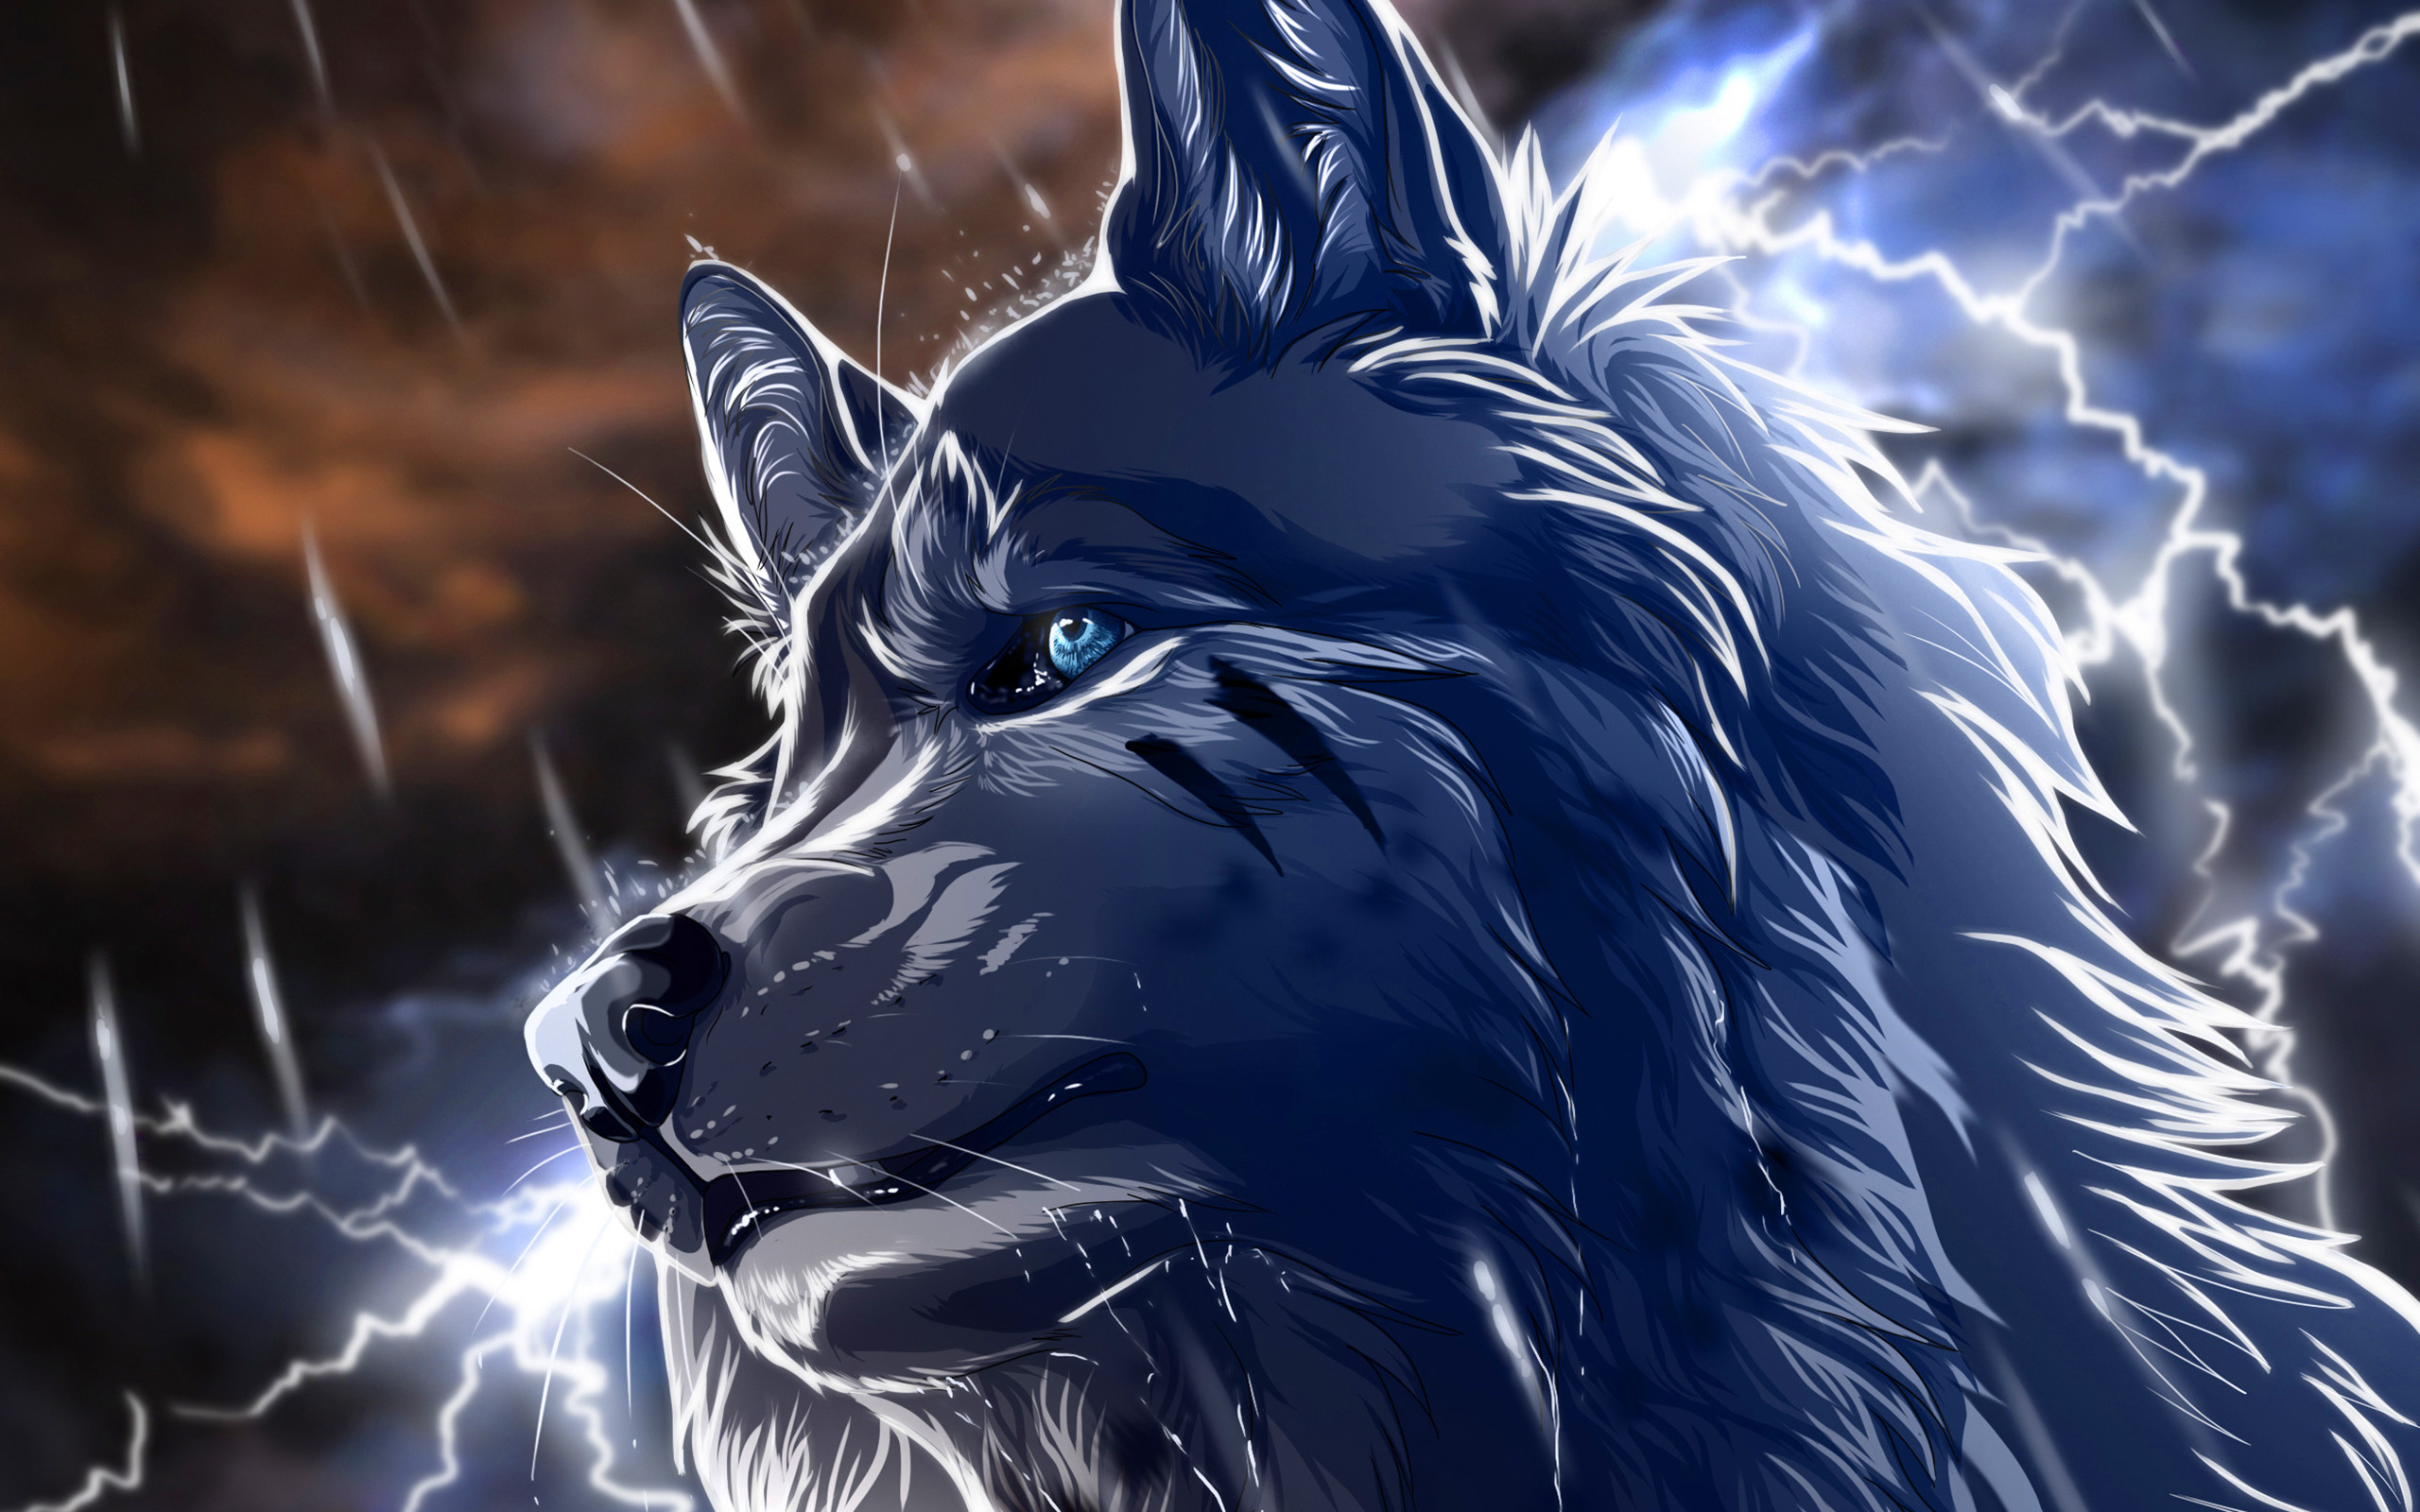 2560x1600, Related Cool Animal Wallpaper Download - Anime Wolf Backgrounds - HD Wallpaper 